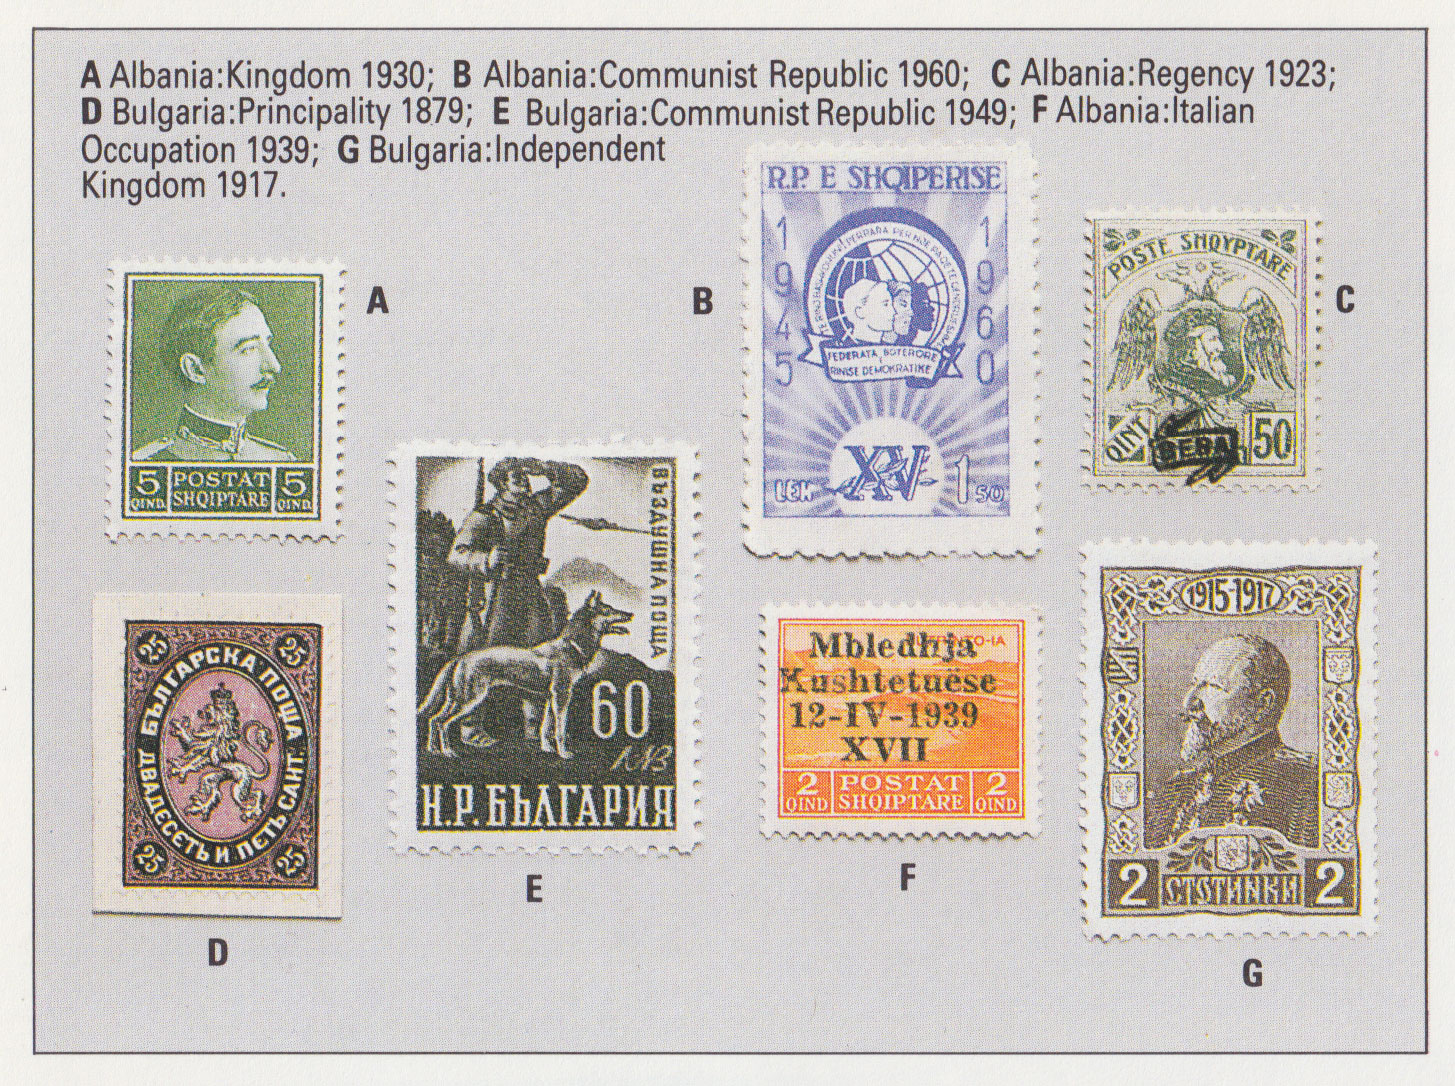 Albanian and Bulgarian stamps